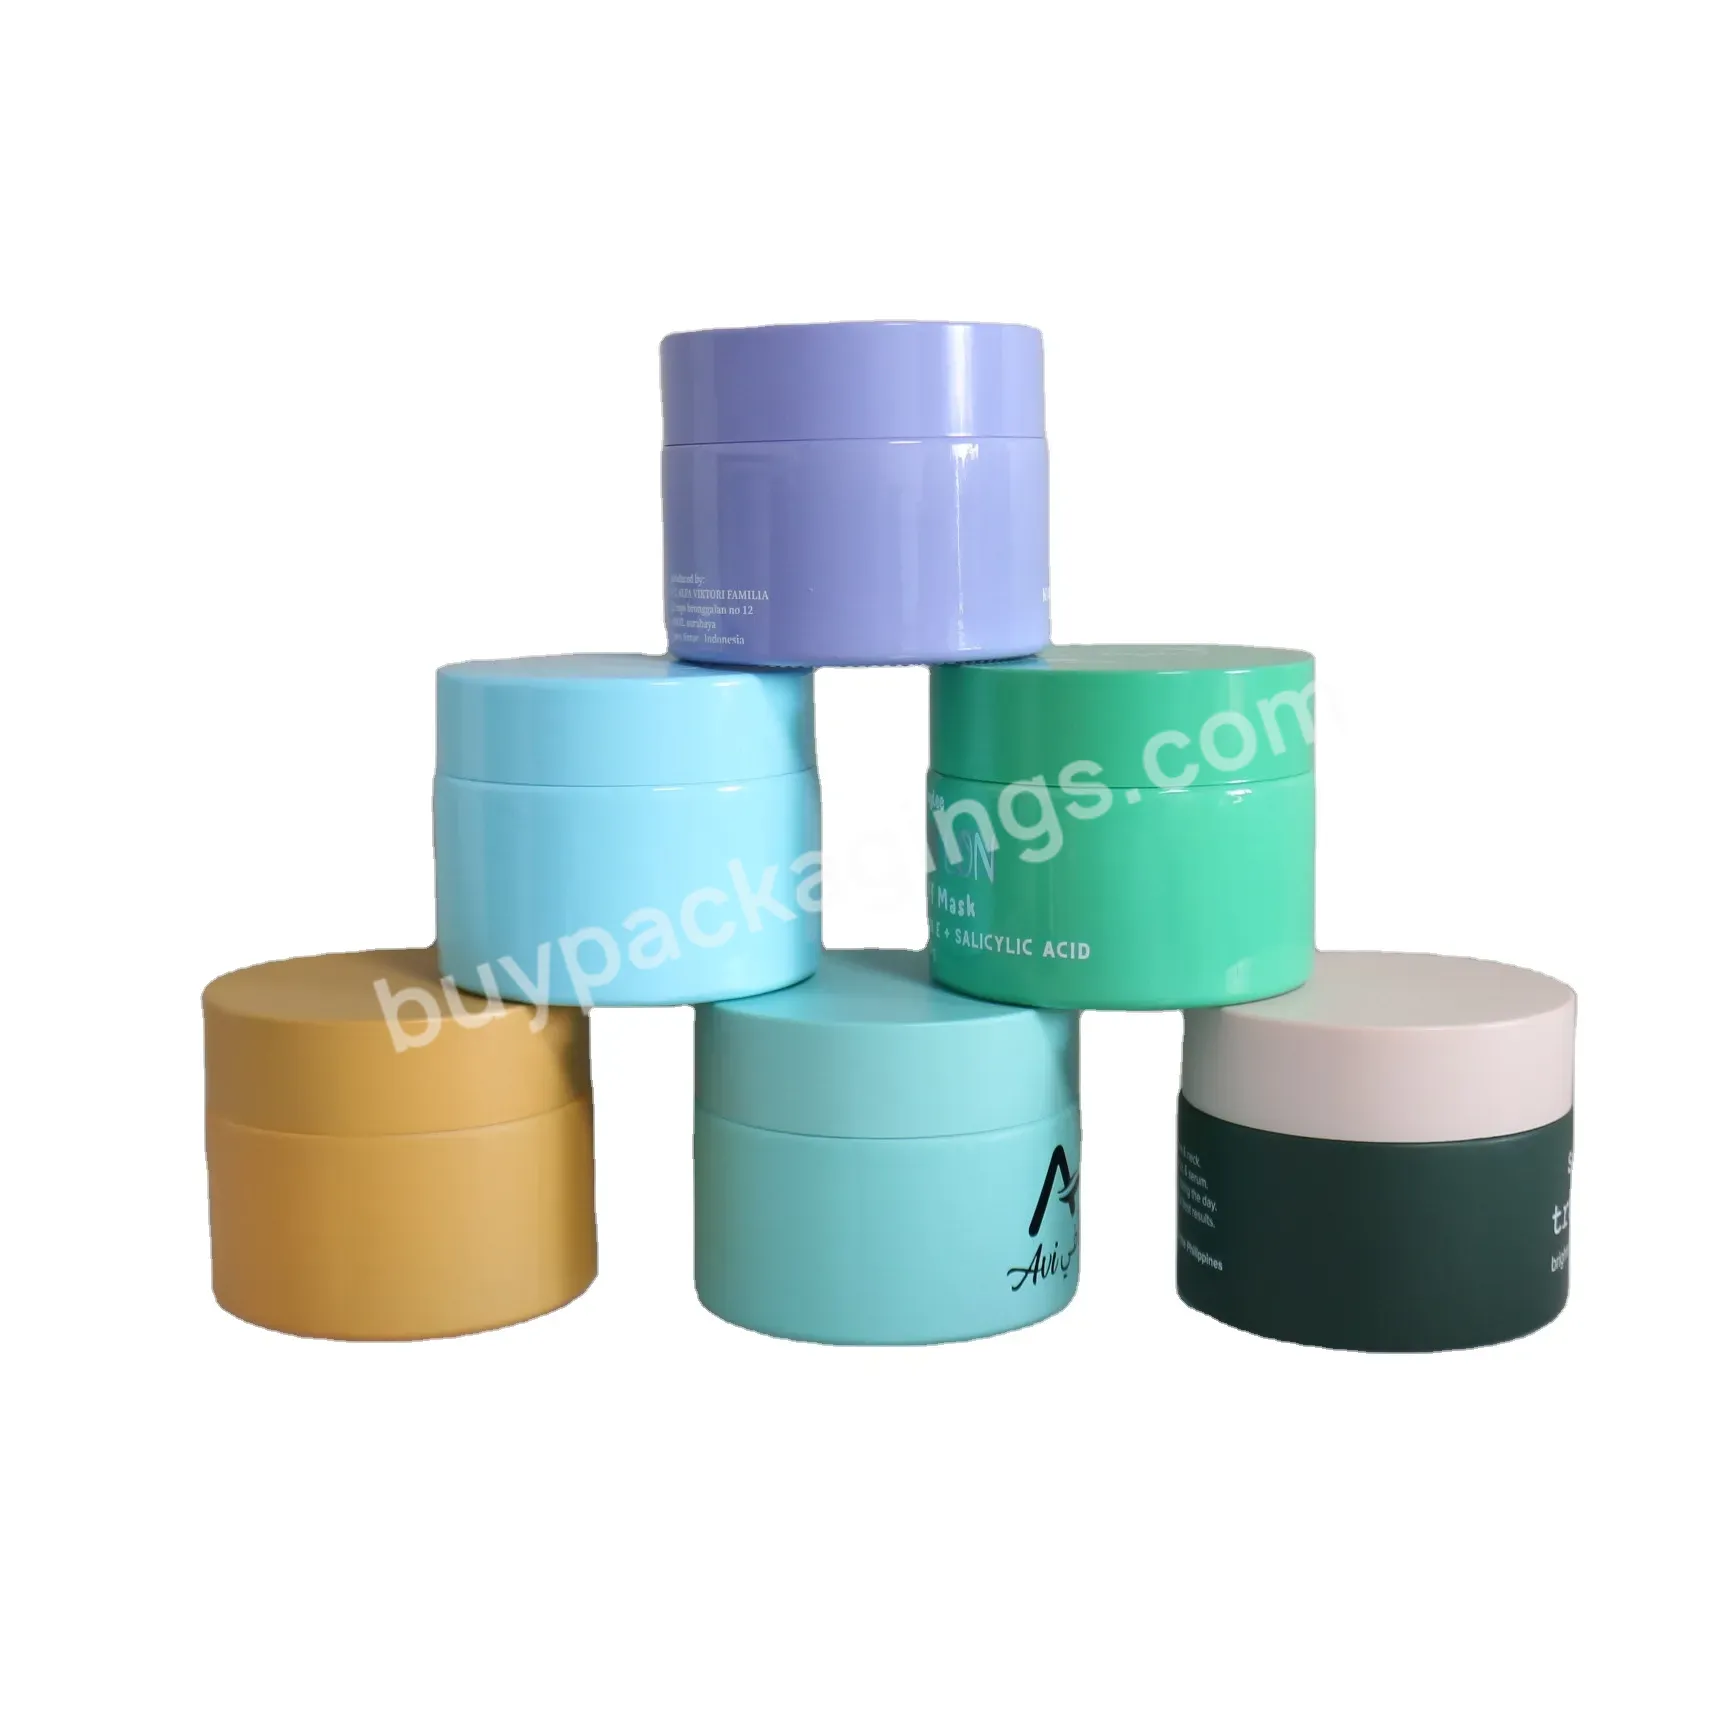 Factory Custom Clear Recyclable 5g 10g 20g 30g 50g 60g 100g Cosmetic Glass Cream Jar Containers With Lids - Buy 5g 10g 20g 30g 50g 60g 100g Clear Glass Cream Jar,Custom Recyclable Glass Cosmetic Jar,Cosmetic Glass Jar Container With Lids.